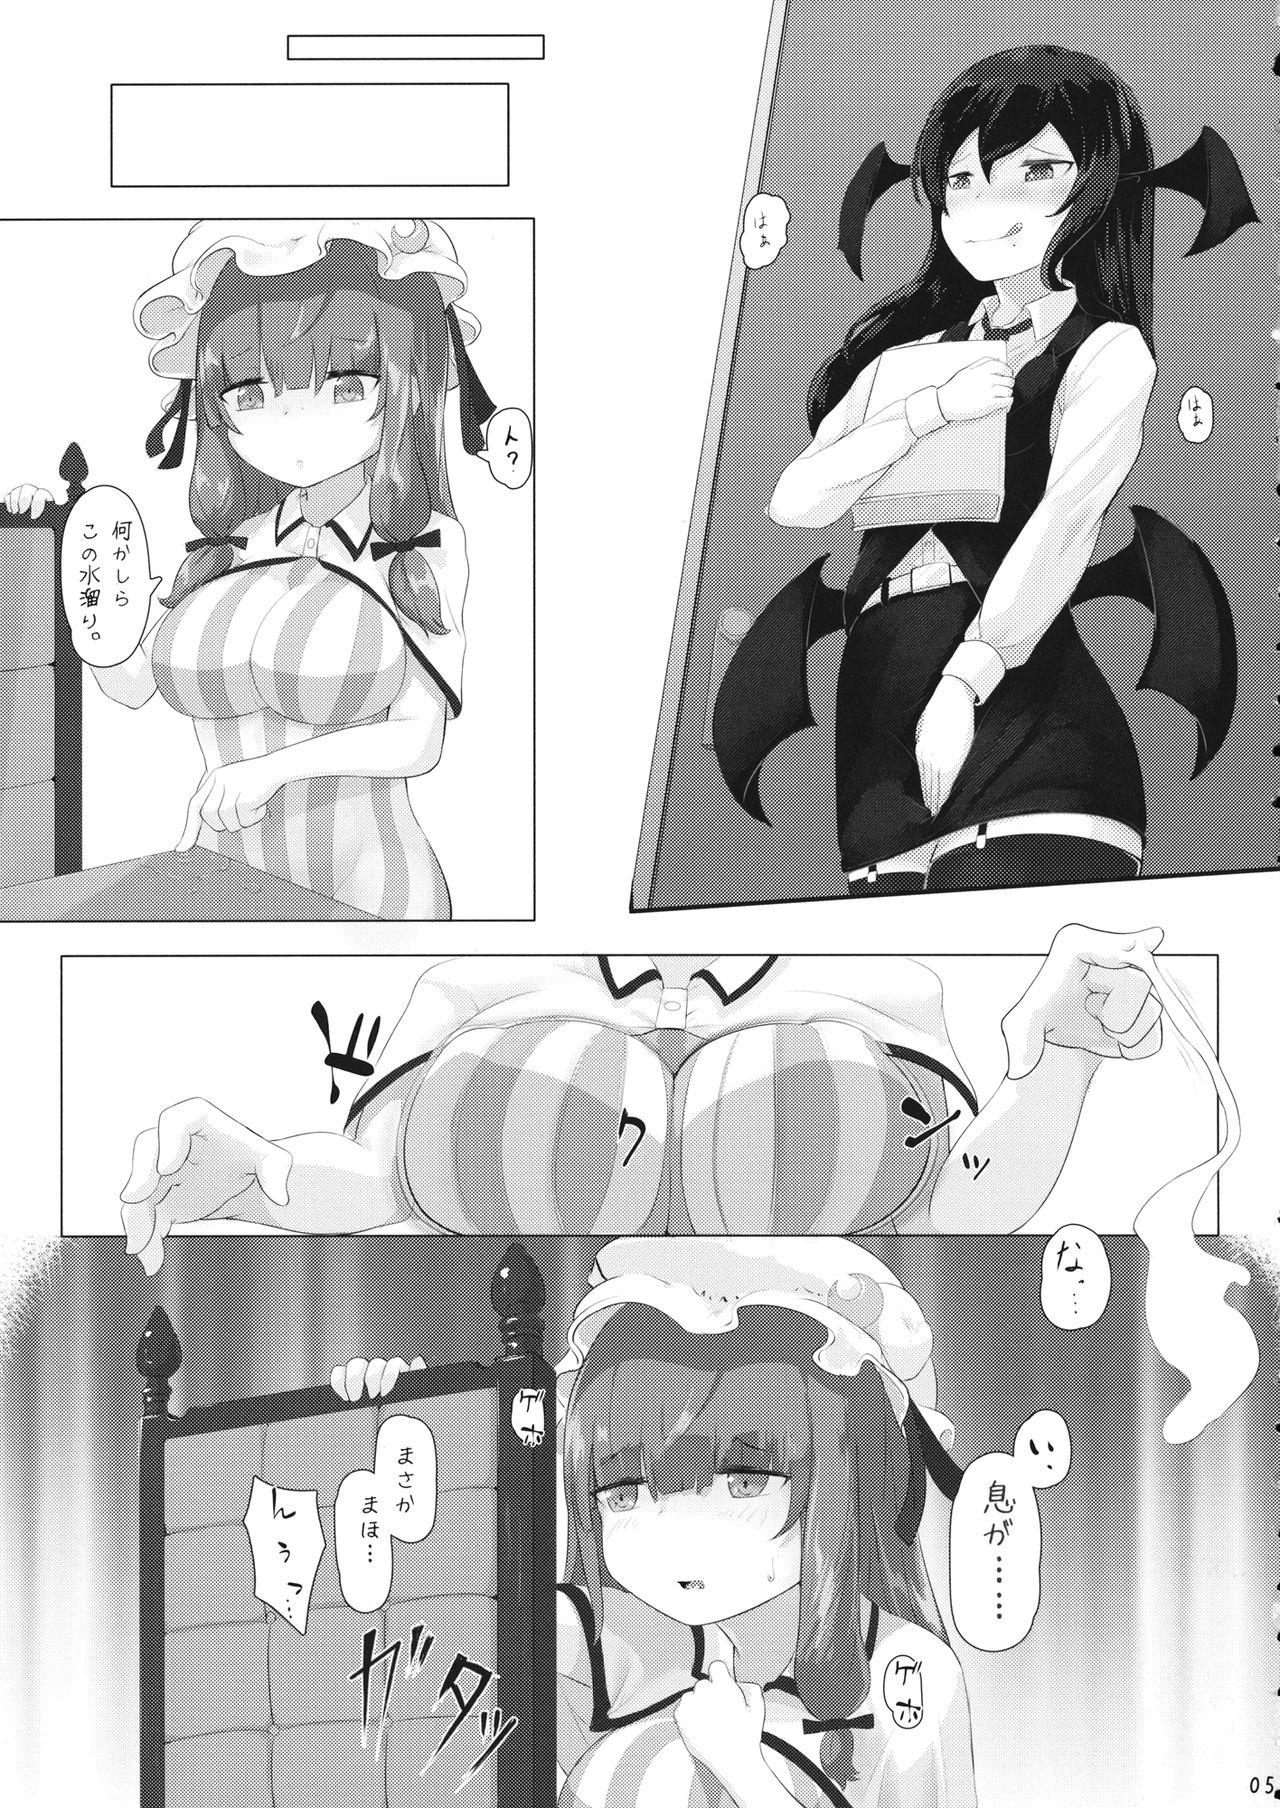 Brazzers LoveDomi! - Touhou project Selfie - Page 4